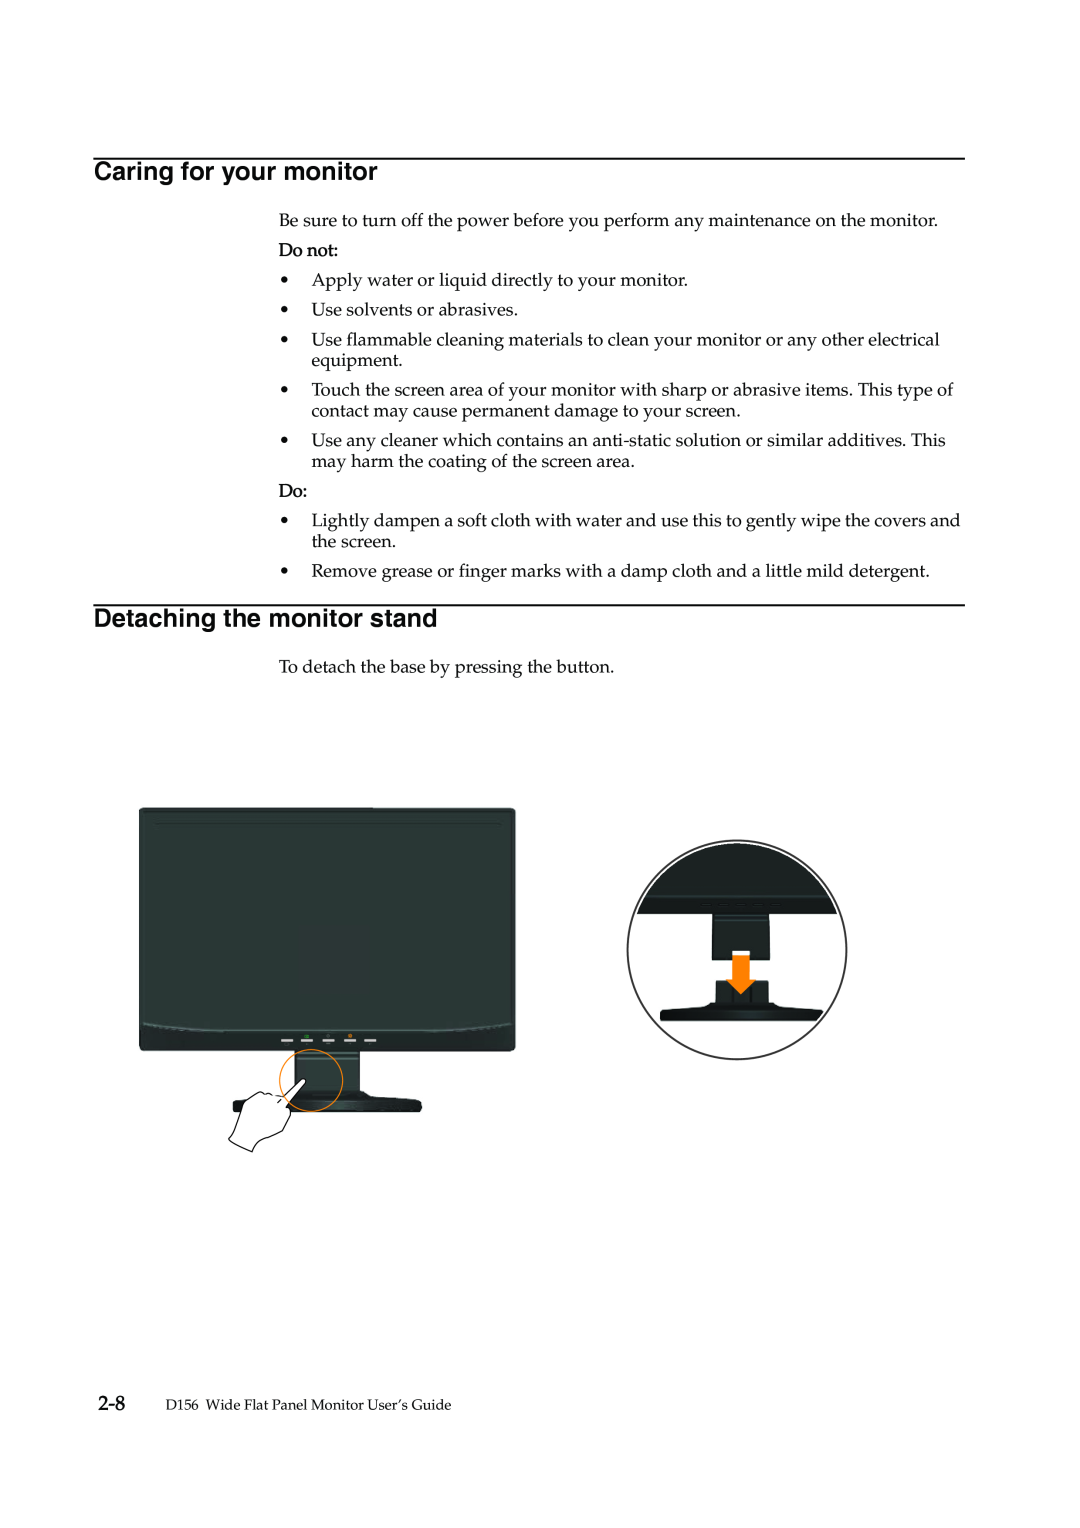 Lenovo 4415-AB1 manual Caring for your monitor, Detaching the monitor stand, Do not 